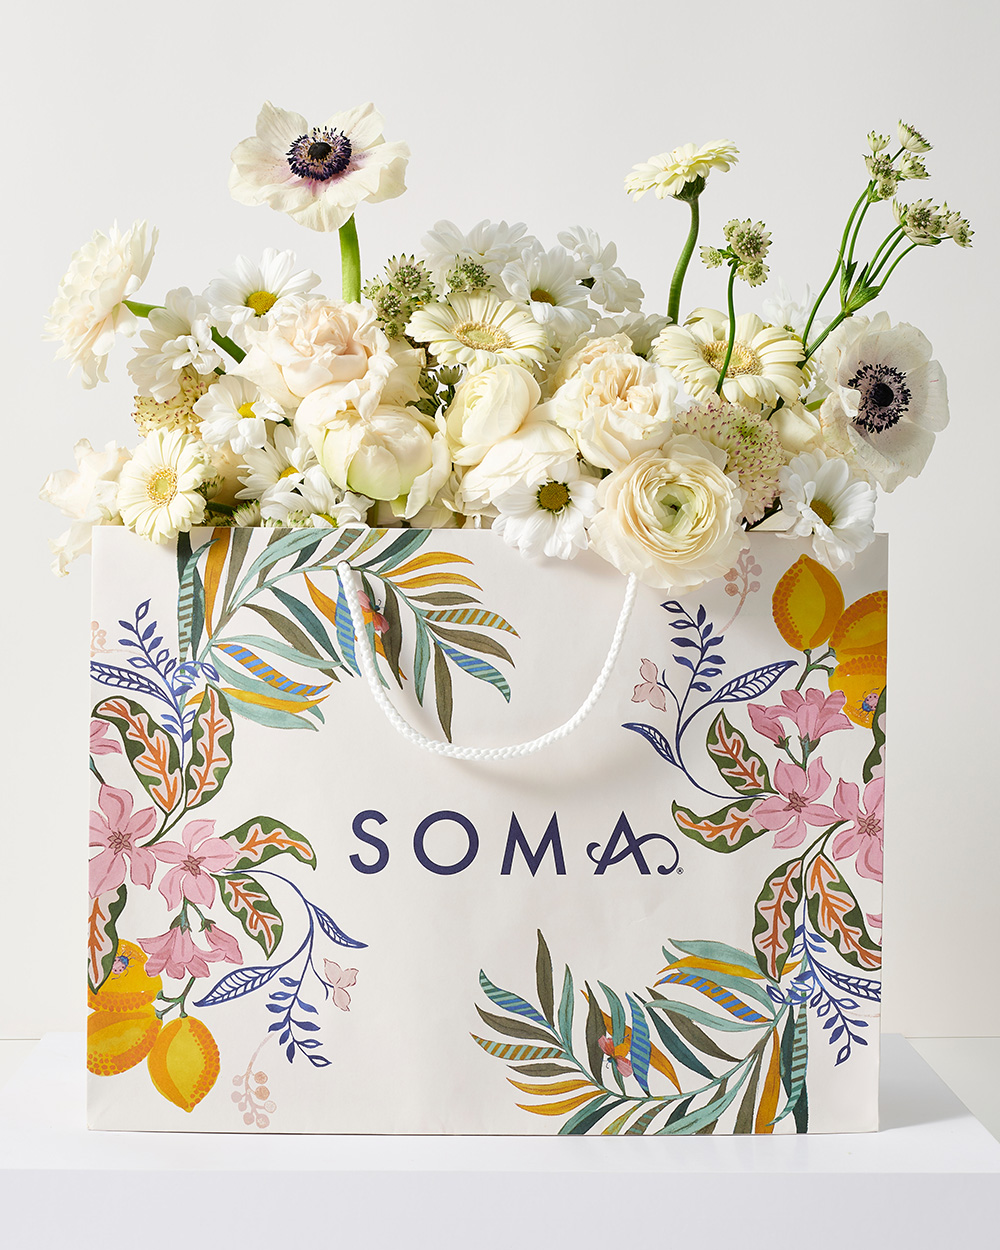 Soma<sup class=st-superscript>®</sup> shopping bag with floral design and white floral blooms inside of bag.